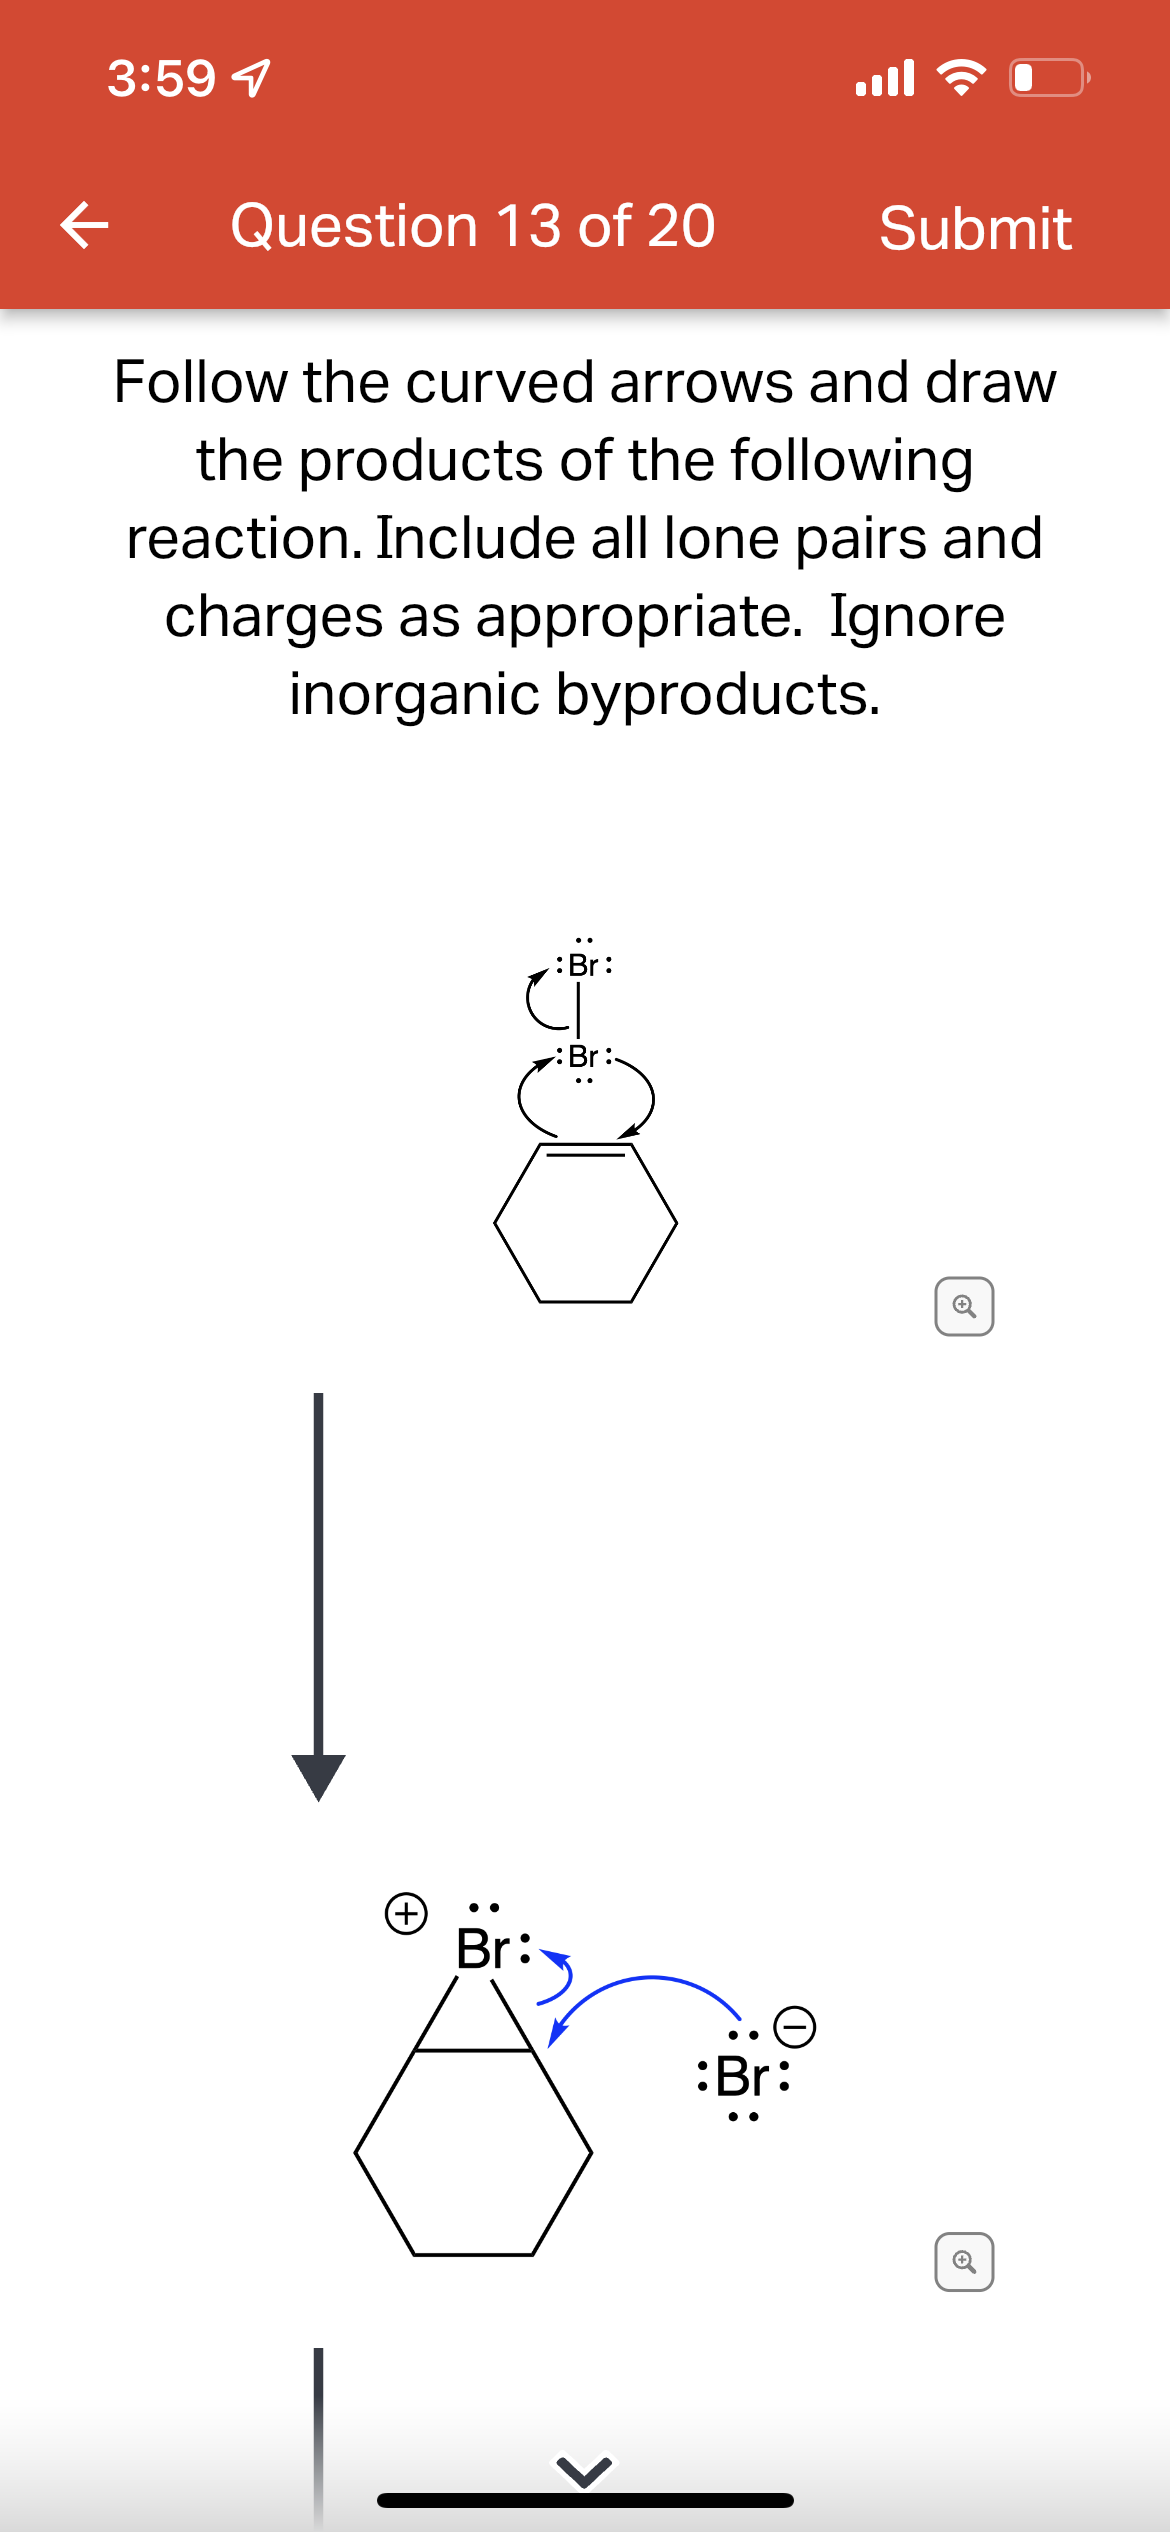 3:59 4
ll ?
Question 13 of 20
Submit
Follow the curved arrows and draw
the products of the following
reaction. Include all lone pairs and
charges as appropriate. Ignore
inorganic byproducts.
:Br:
(+)
Br
:Br:
